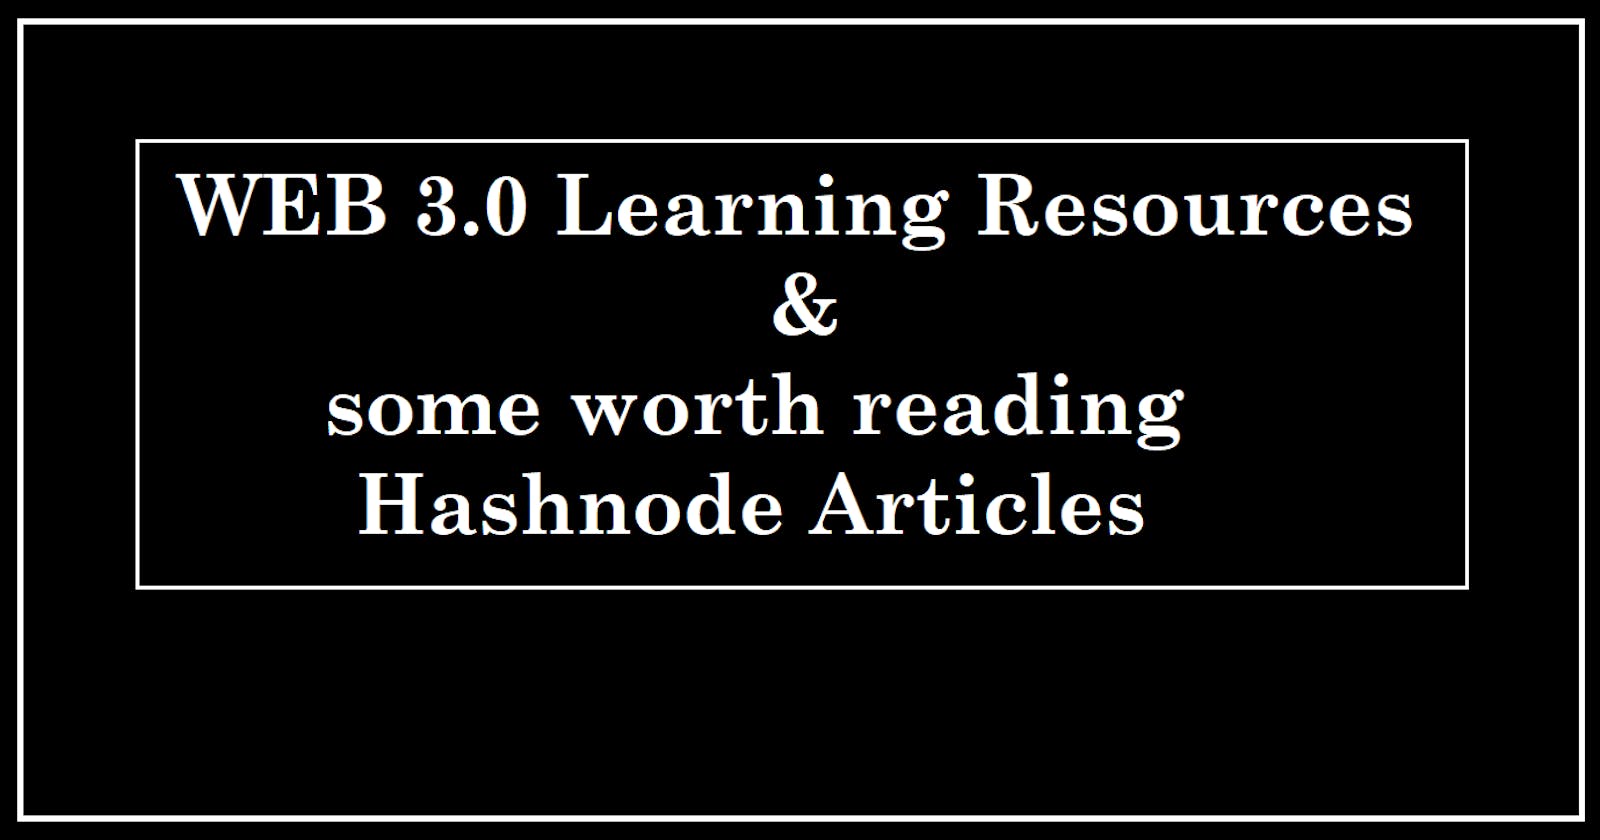 WEB 3.0 Learning Resources & some worth reading Hashnode Articles